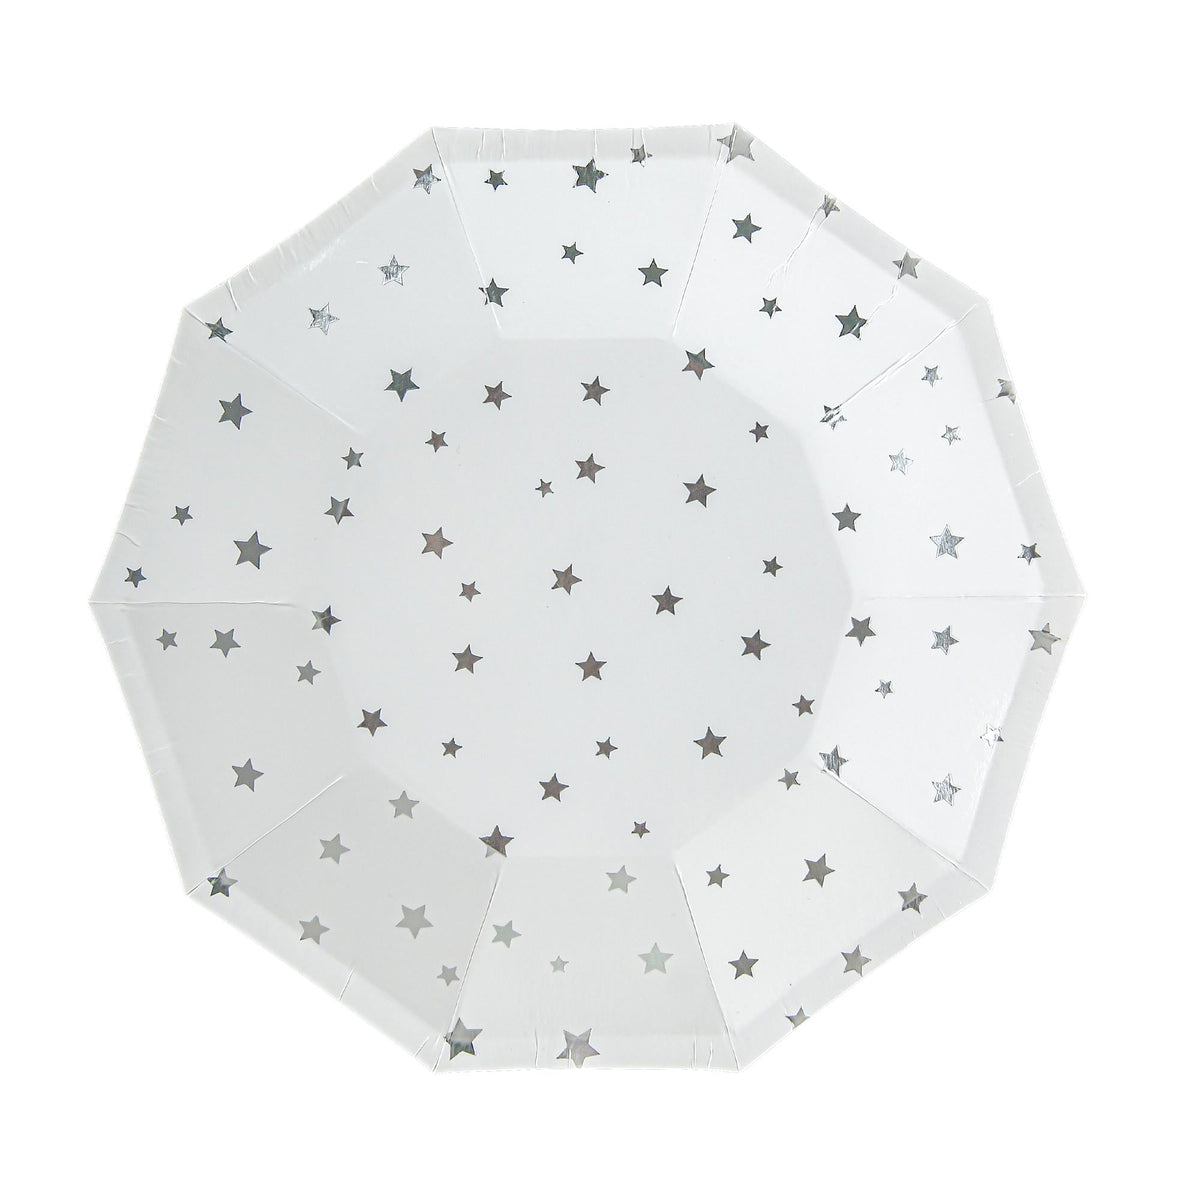 YIWU SANDY PAPER PRODUCTS CO., LTD Everyday Entertaining Little Stars Small Decagon Dessert Paper Plates, Silver, 7 Inches, 8 Count 810120713106